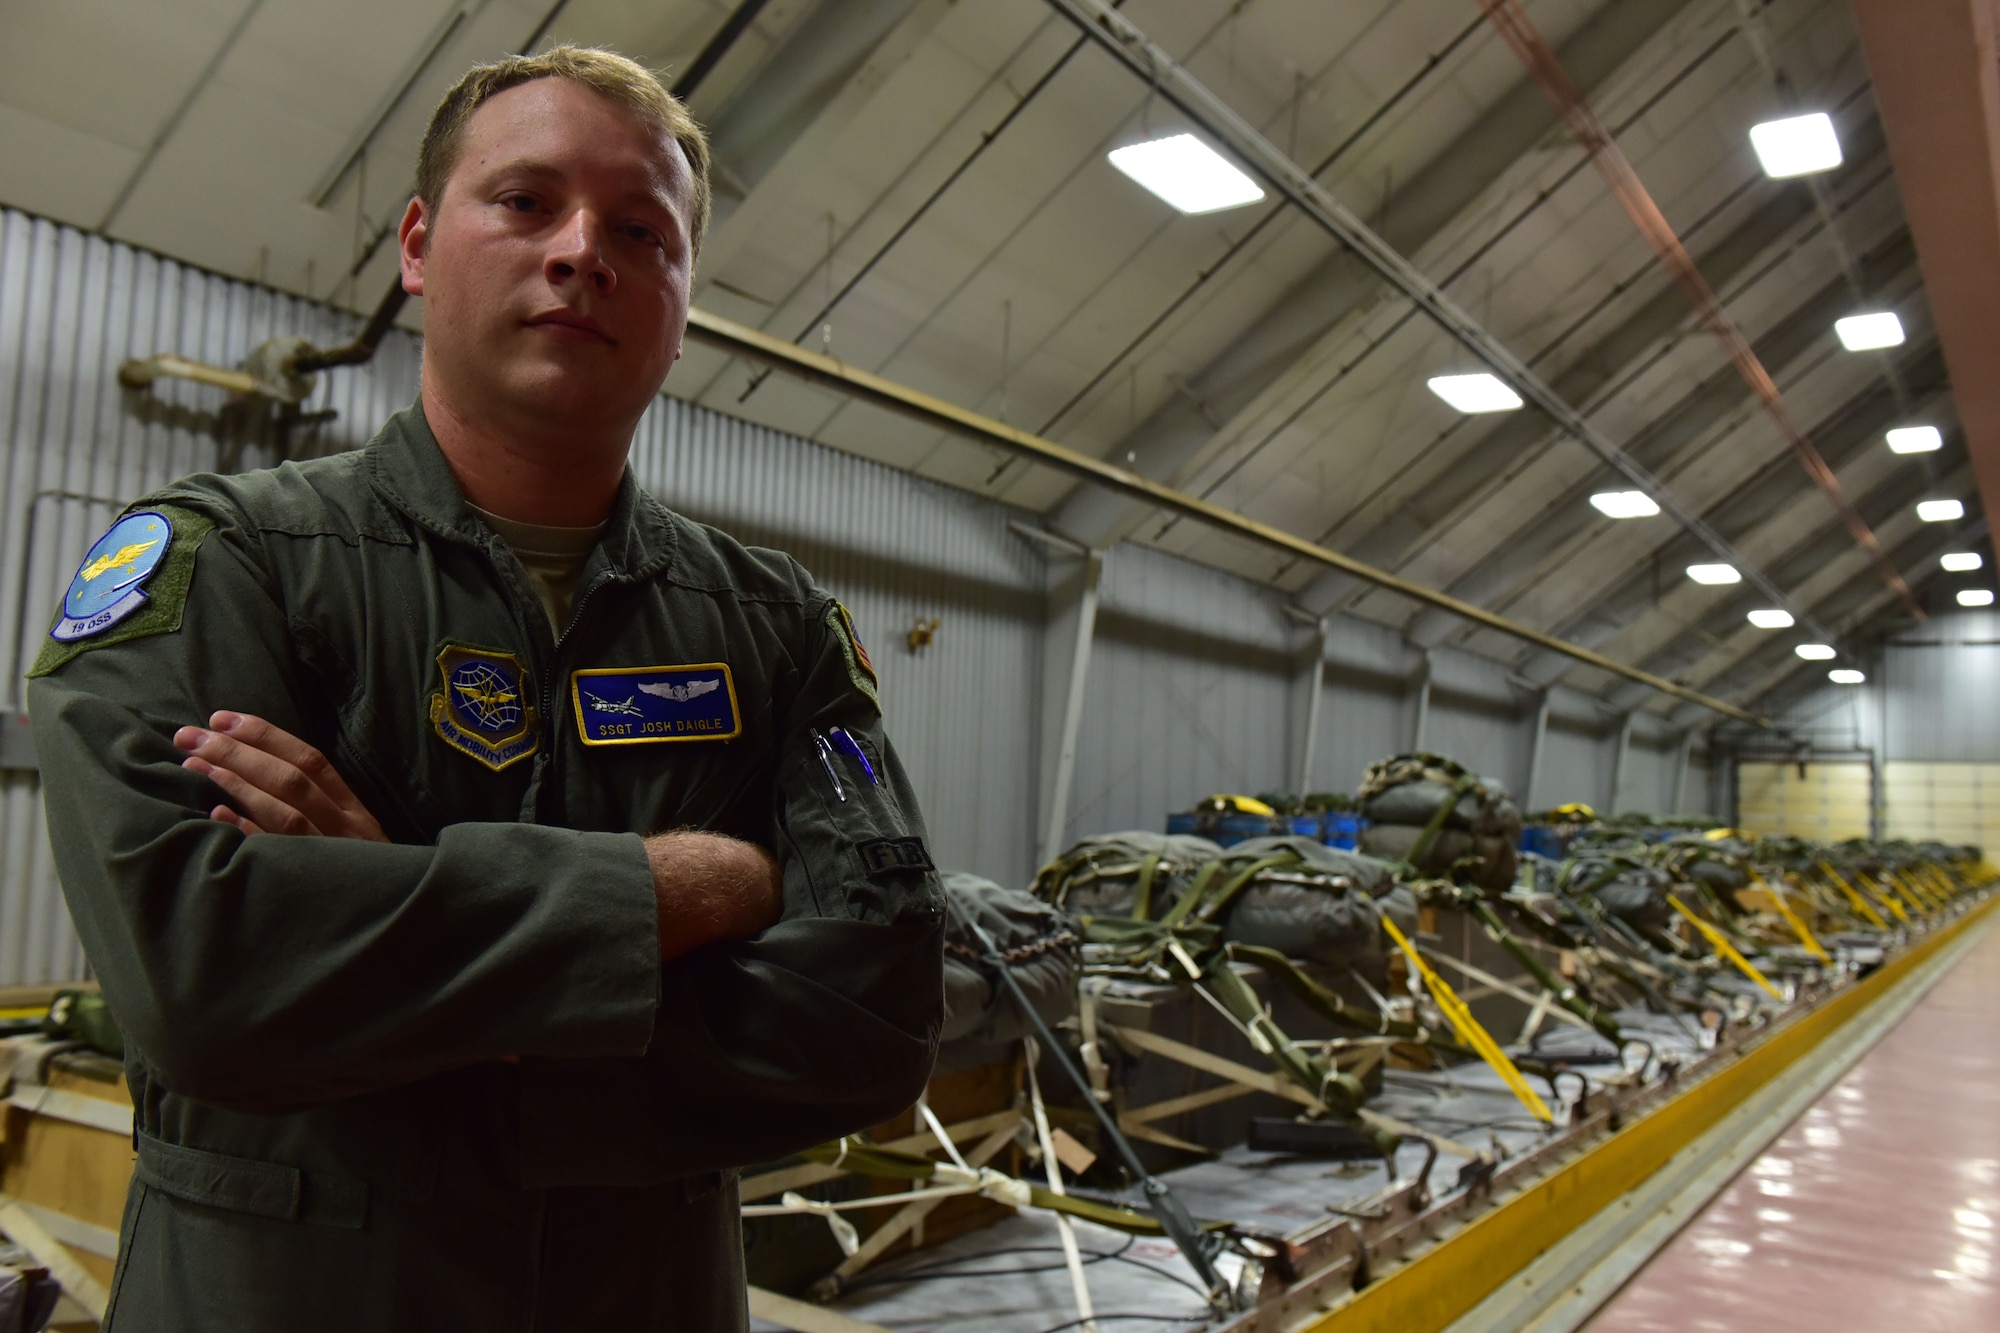 Staff Sgt. Joshua Daigle, 19th Operations Support Squadron tactics loadmaster, is nominated for the Combat Airlifter of the Week Sept. 6, 2017 at Little Rock Air Force Base, Ark. Daigle was selected for his efforts during Mobility Guardian. (U.S. Air Force photo by Airman Rhett Isbell)